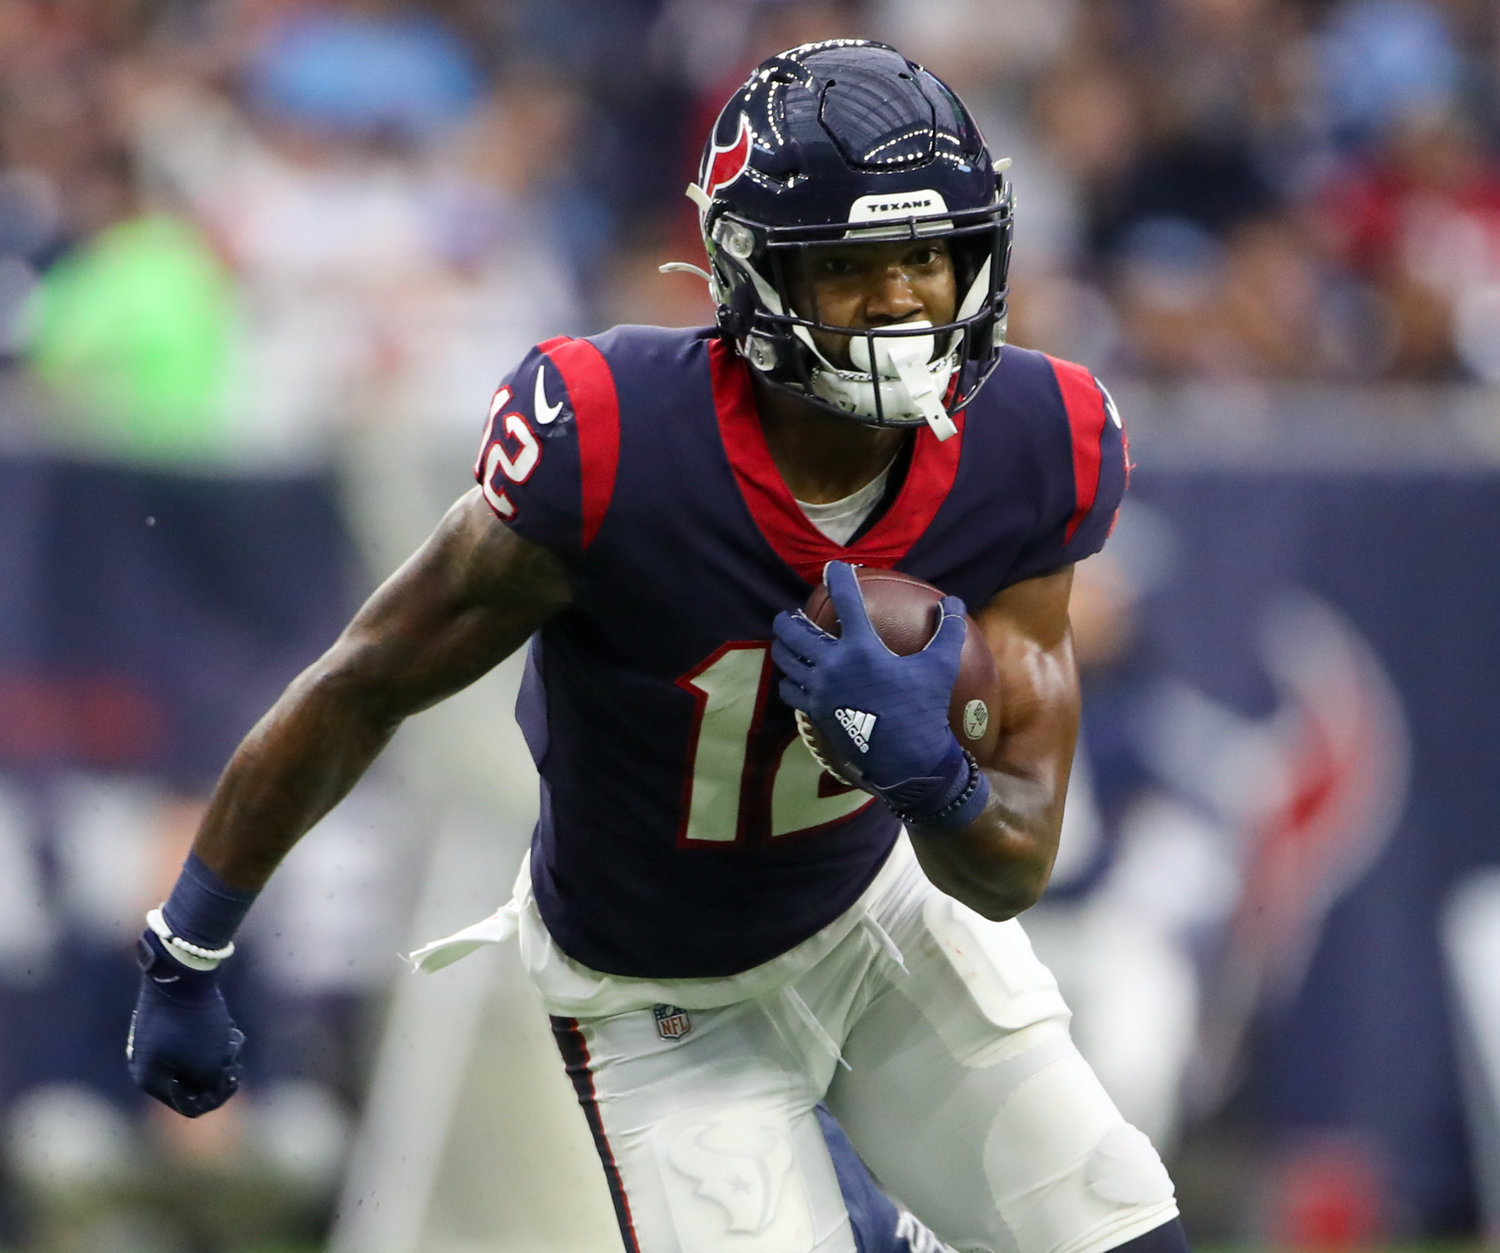 Houston Texans wide receiver Nico Collins (12) carries the ball after a catch during an NFL game between the Texans and the Titans on Jan. 9, 2022 in Houston, Texas. The Titans won, 28-25.